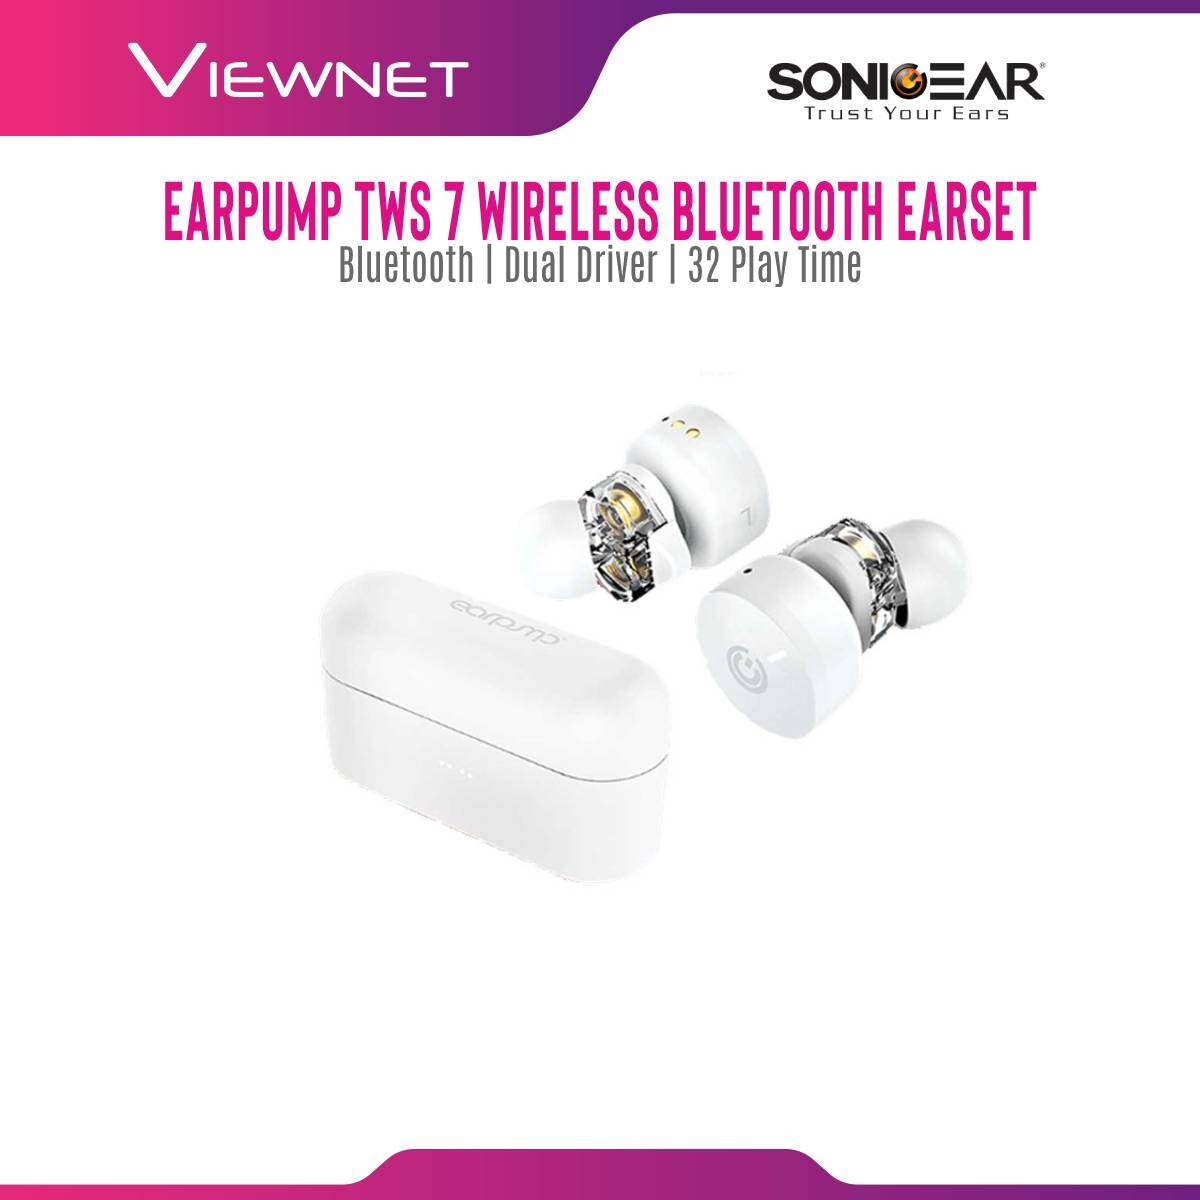 SonicGear Wireless Earpump Earbud TWS 7 HyperBass with Bluetooth 5.0, Dual Driver, Ergonomic In Ear Design, Voice Assistant, Super Mic Reception, 8 Hour Music Play Time (50% Volume) + 24 Hour for Battery Case